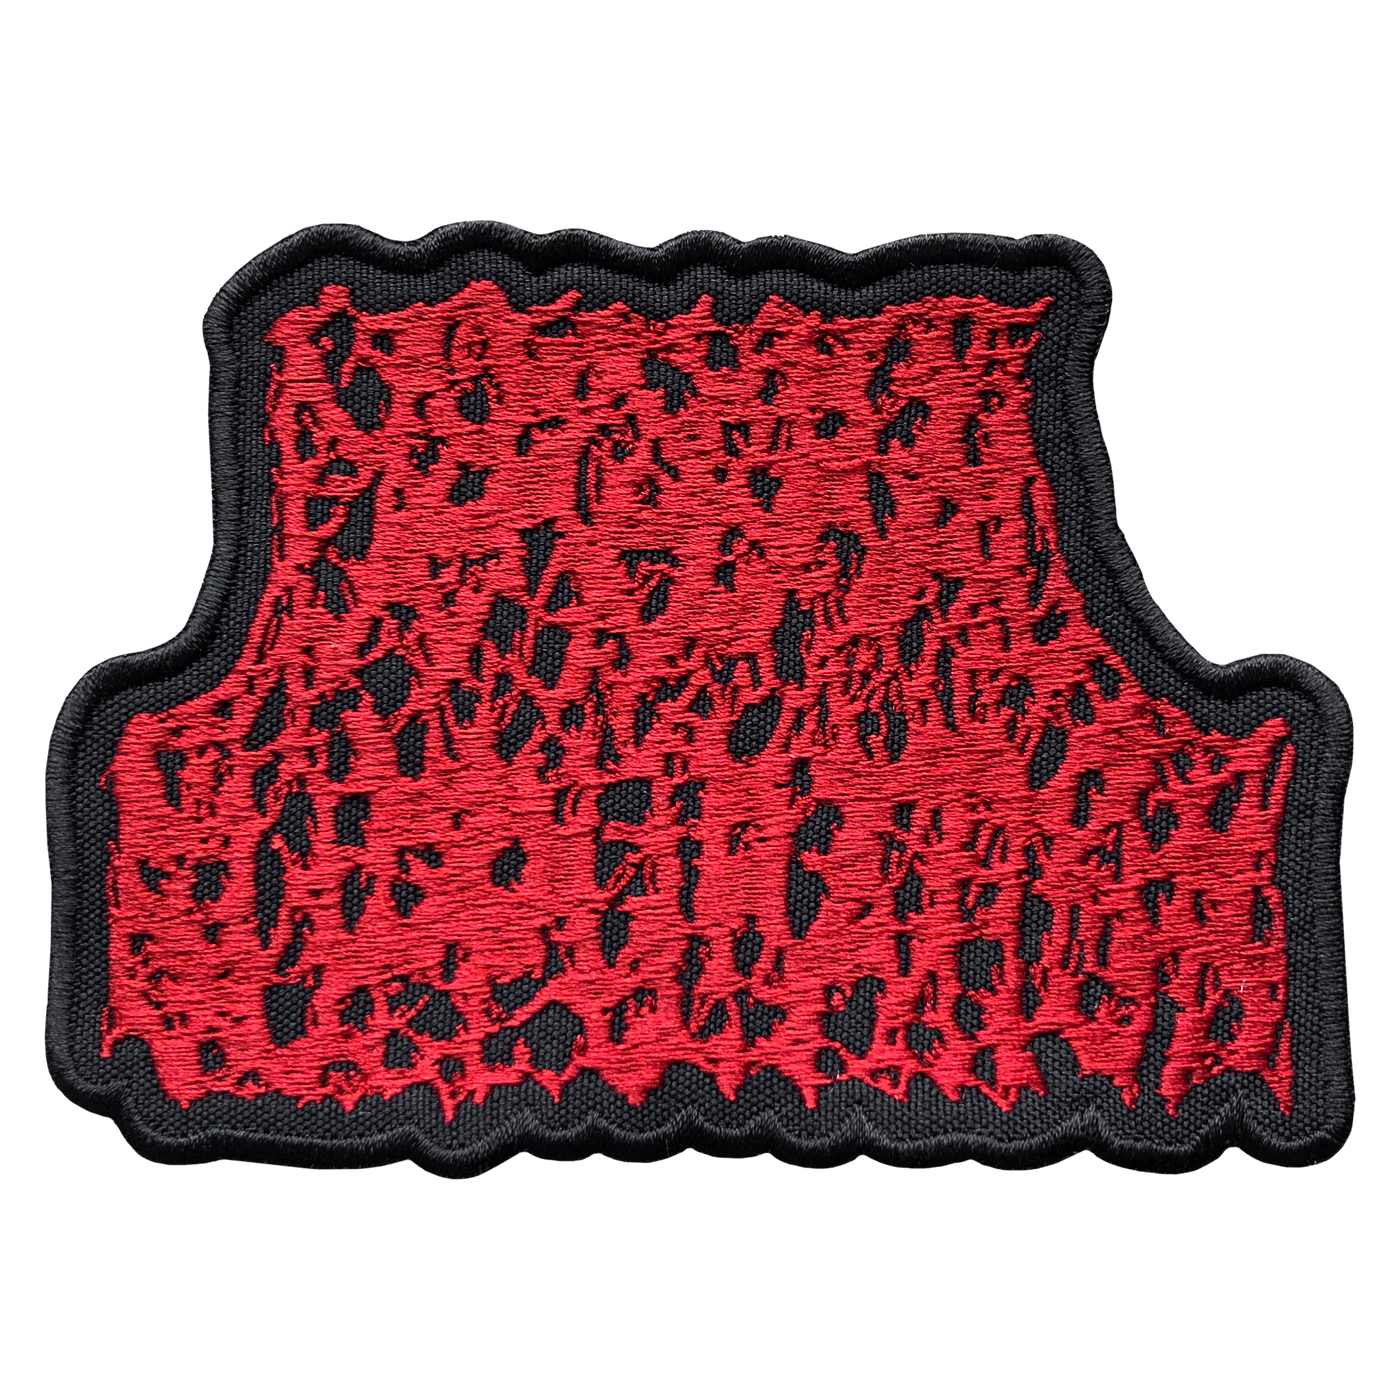 Cerebral Suppuration Patches